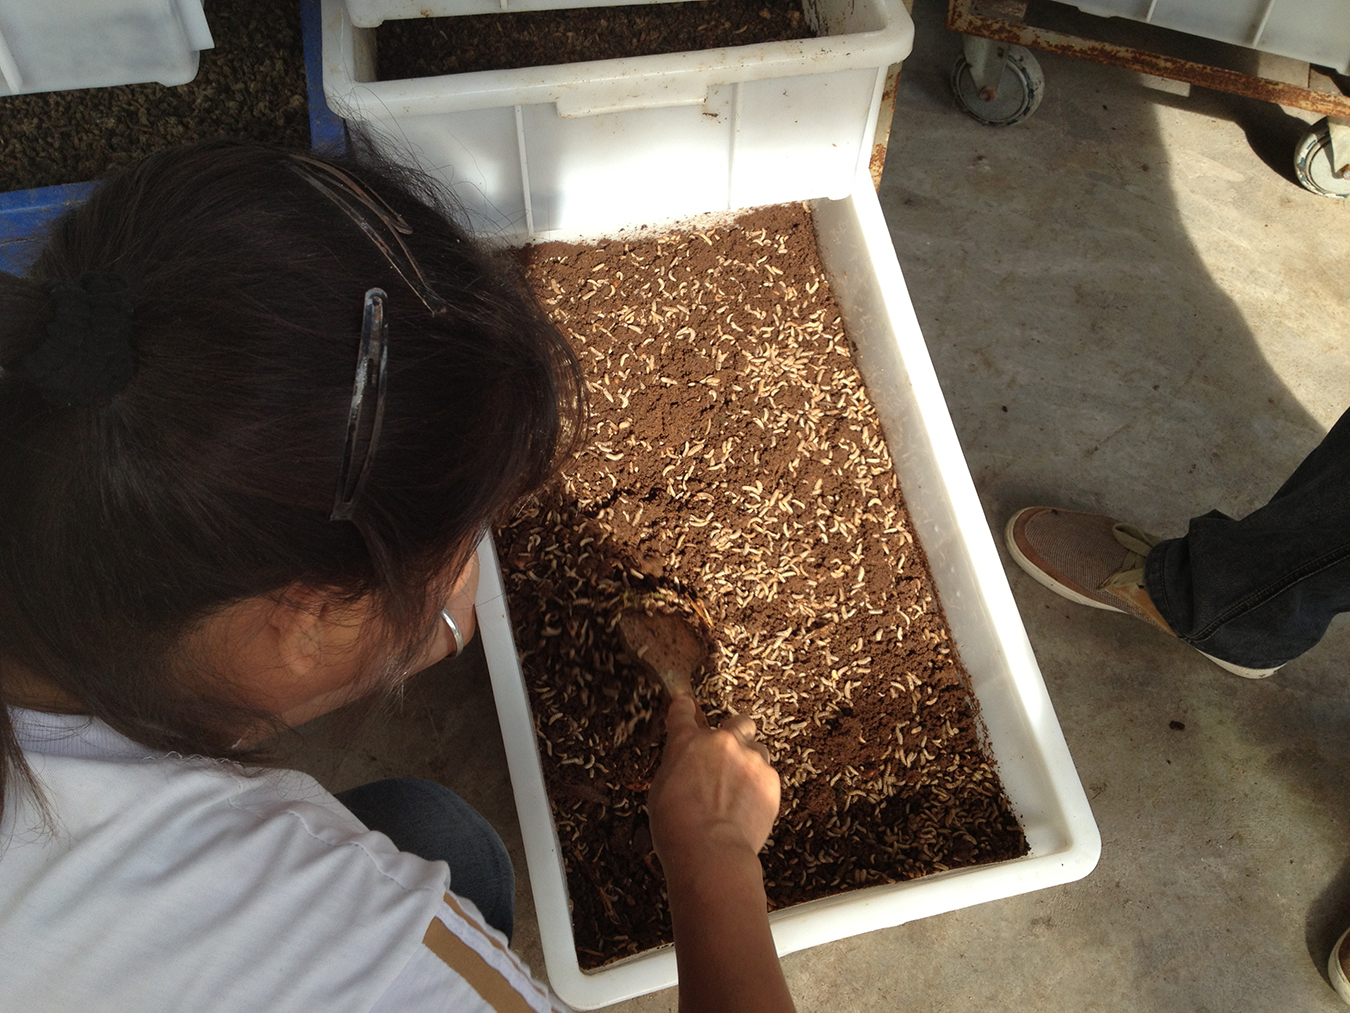 A caretaker stirs a tray of larvae in a Guangzhou field research station. Photo by Amy Zhang.